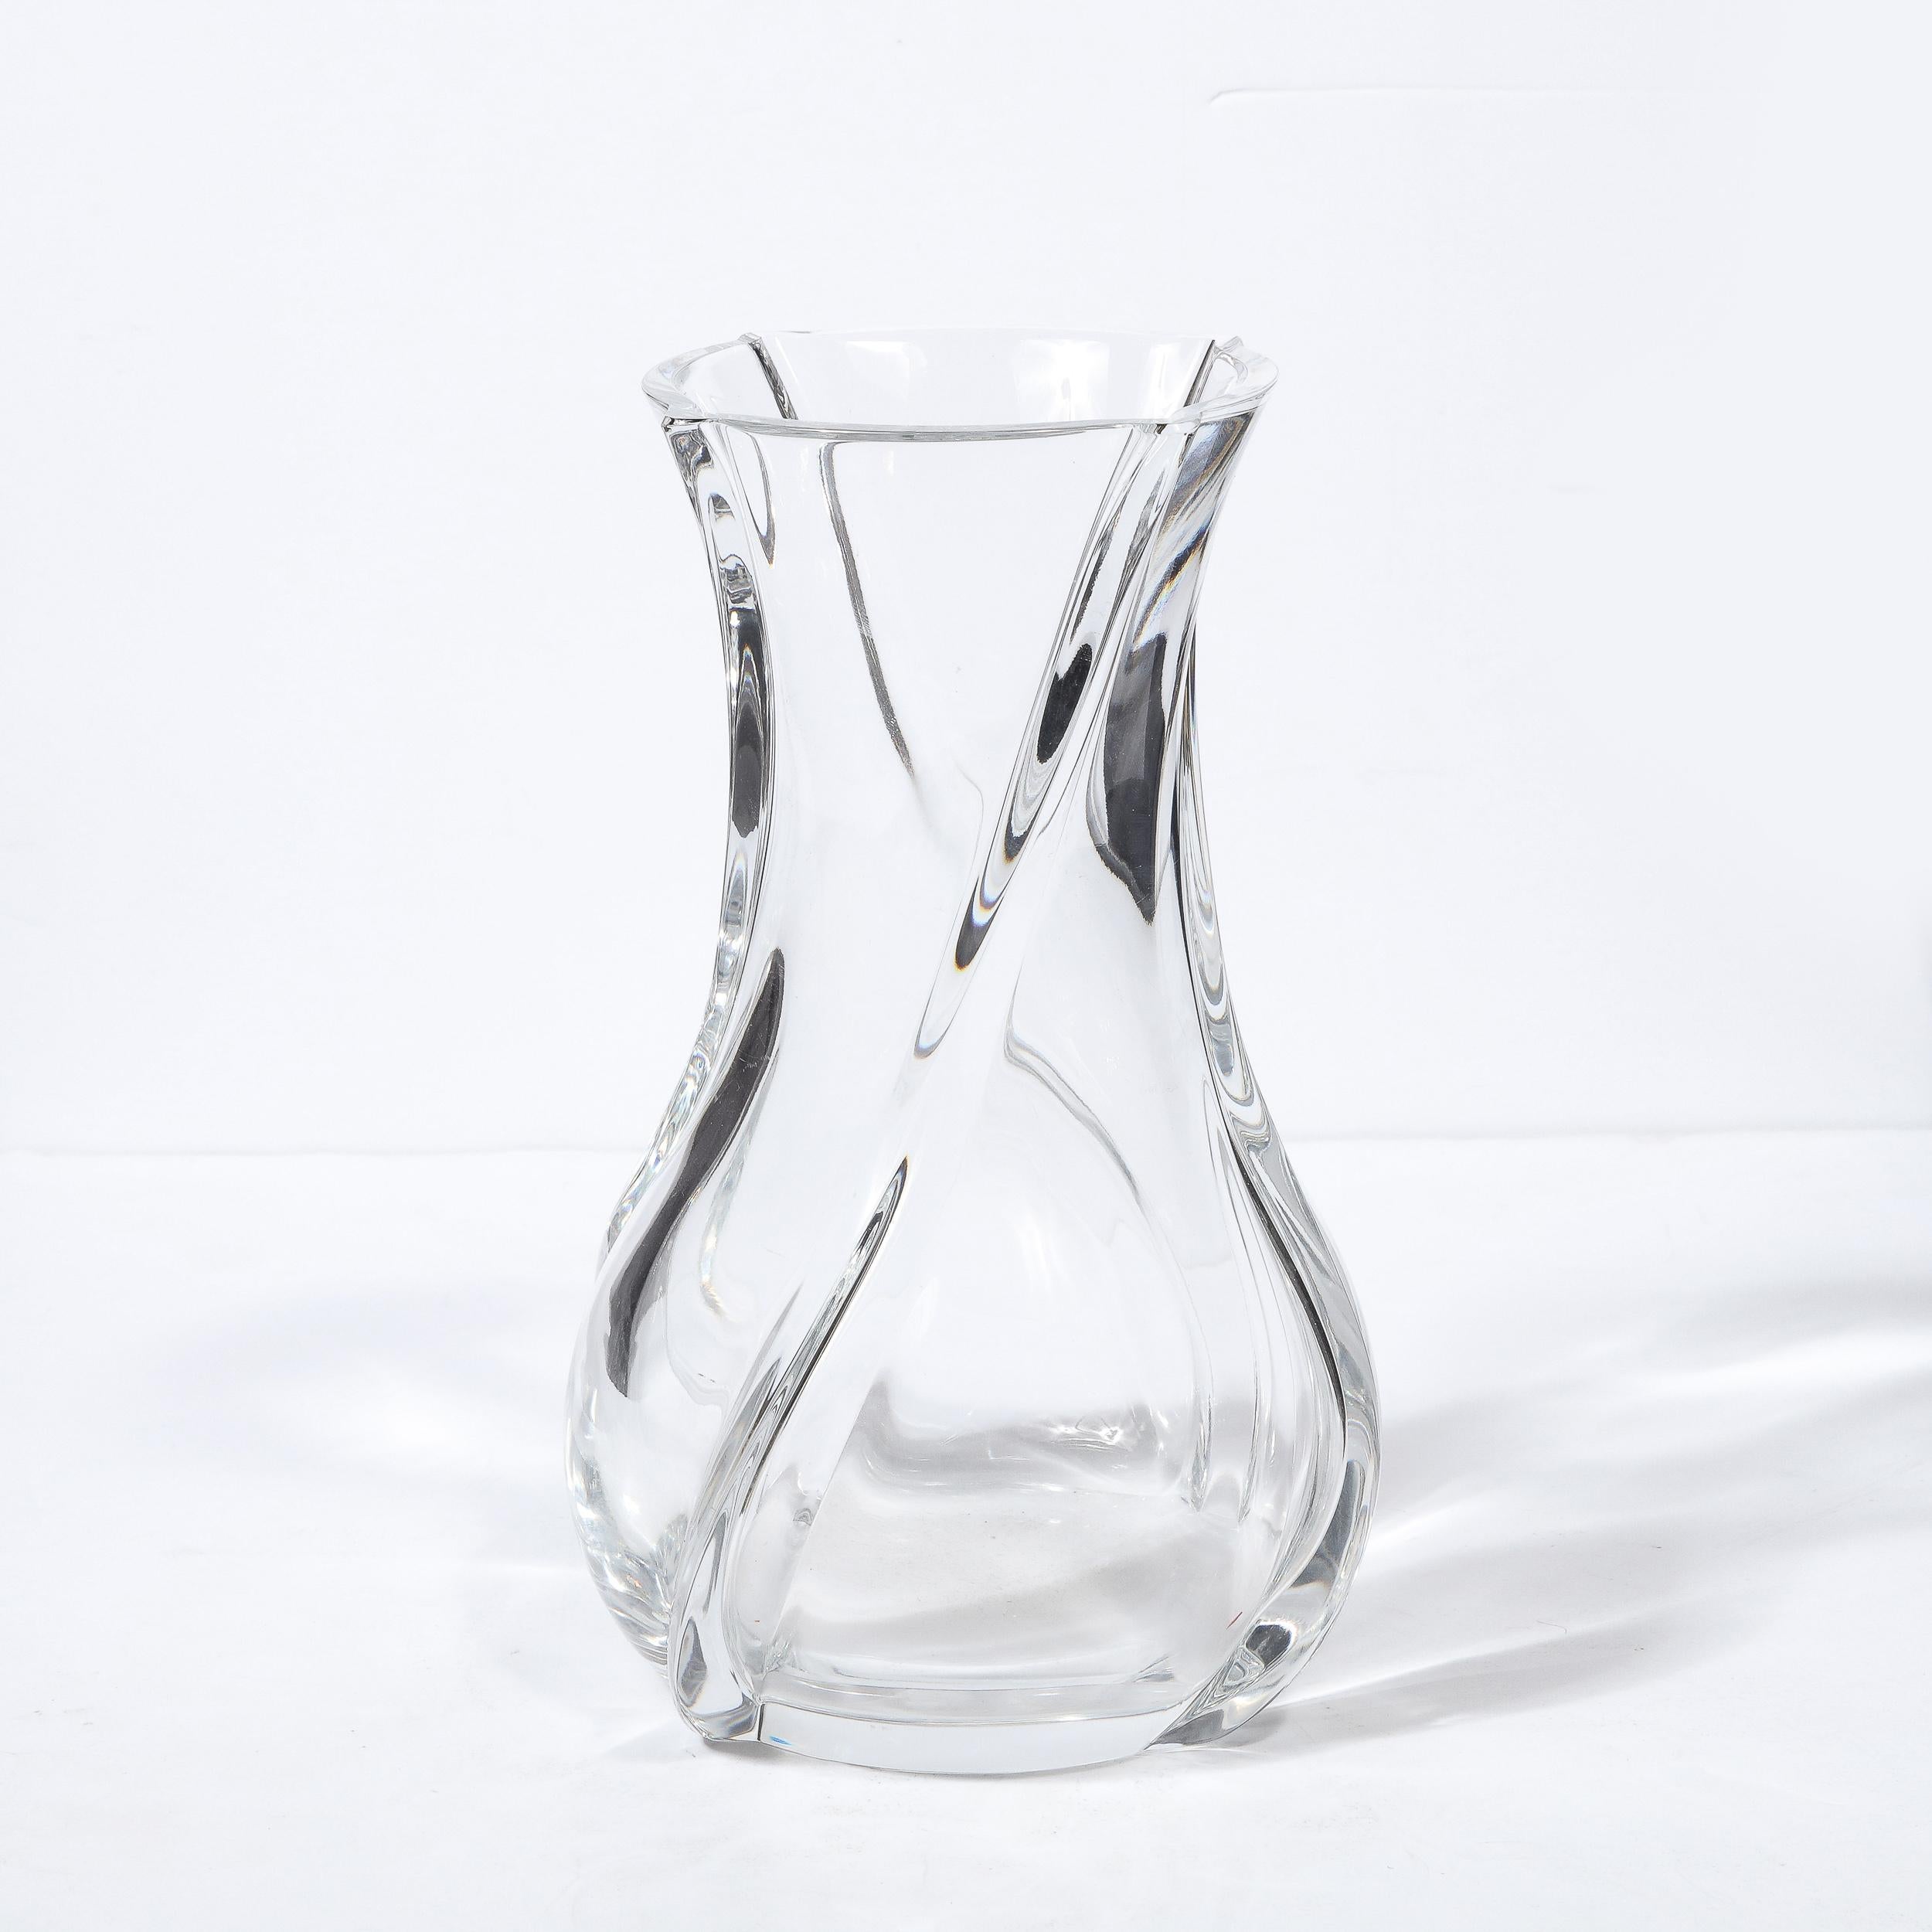 This refined and sculptural translucent crystal vase was realized in France by Baccarat- one of the premiere makers of crystals objects since 1764- during the latter half of the 20th century. A striking example of Baccarat's twist pattern, this